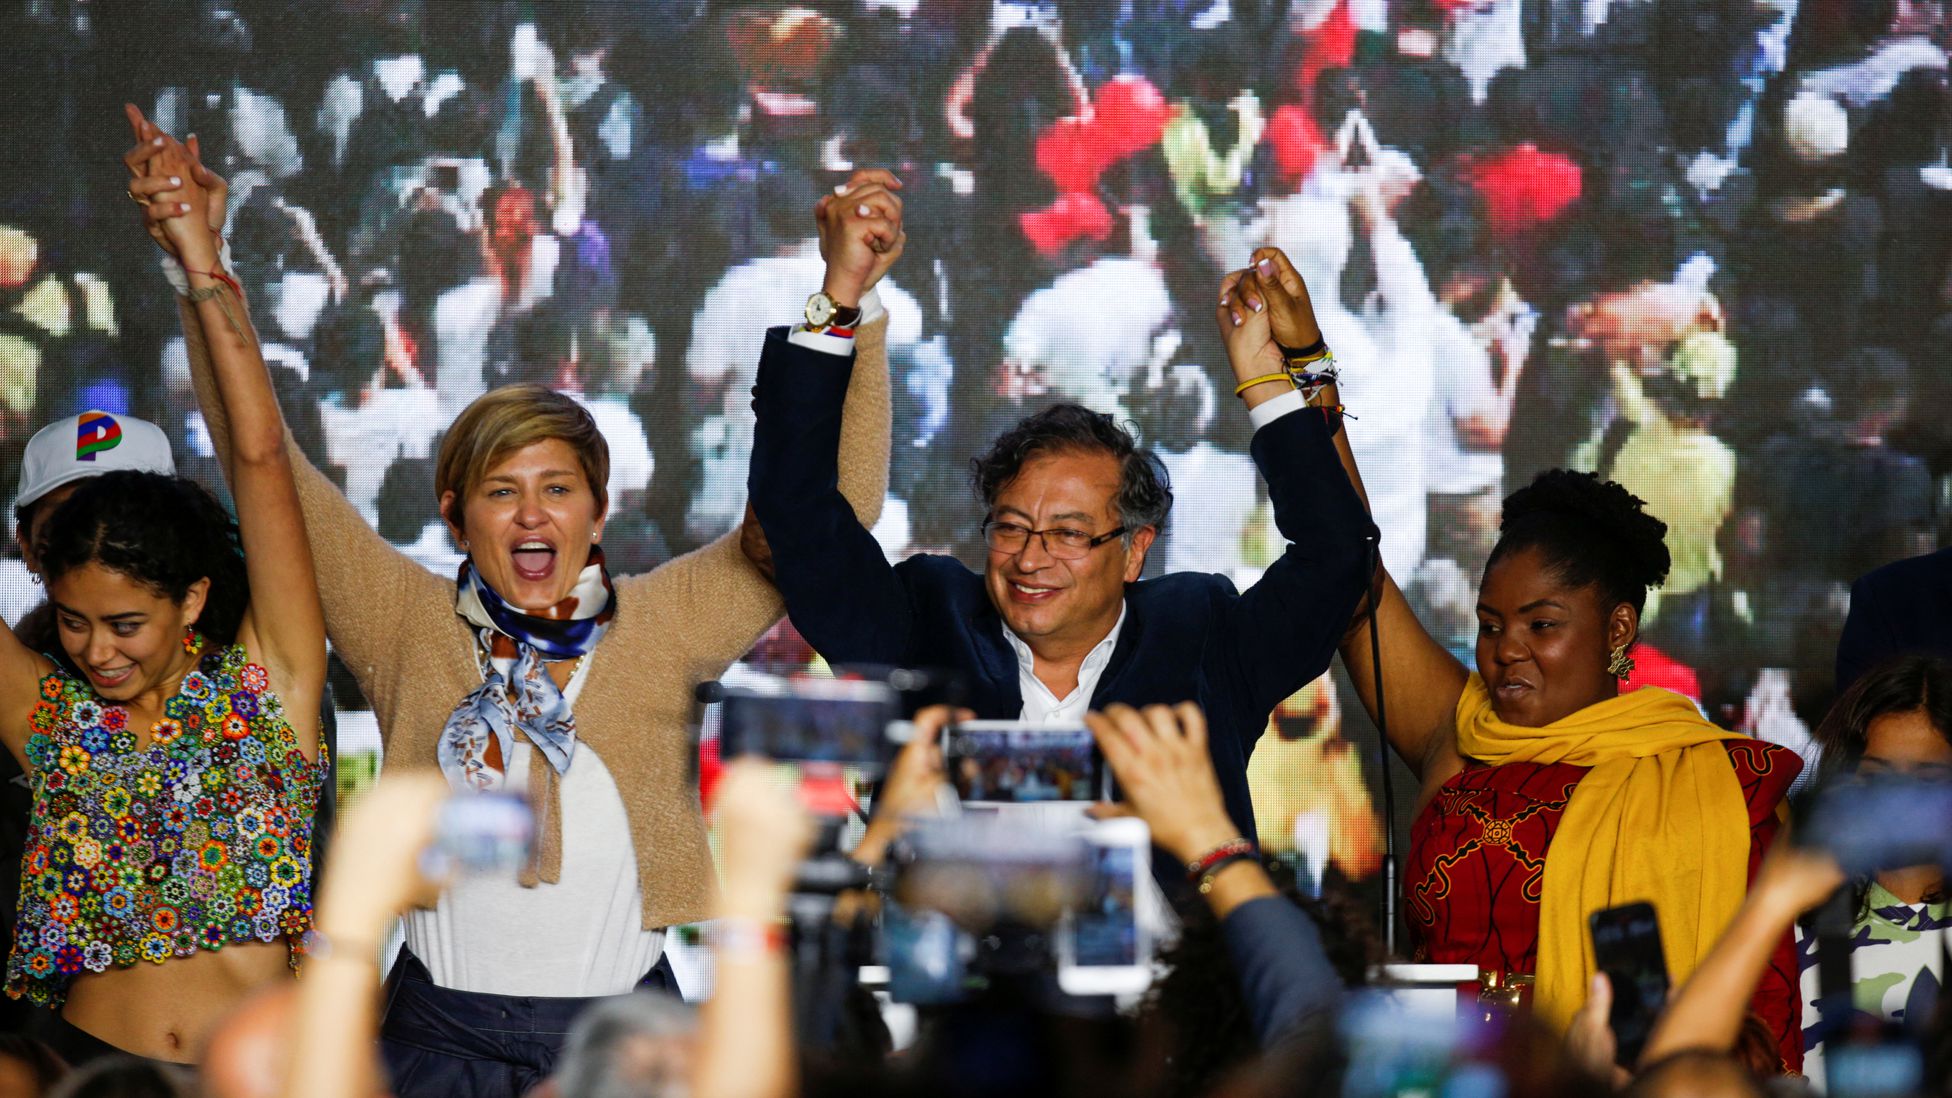 Gustavo Petro wins Colombia’s official political race